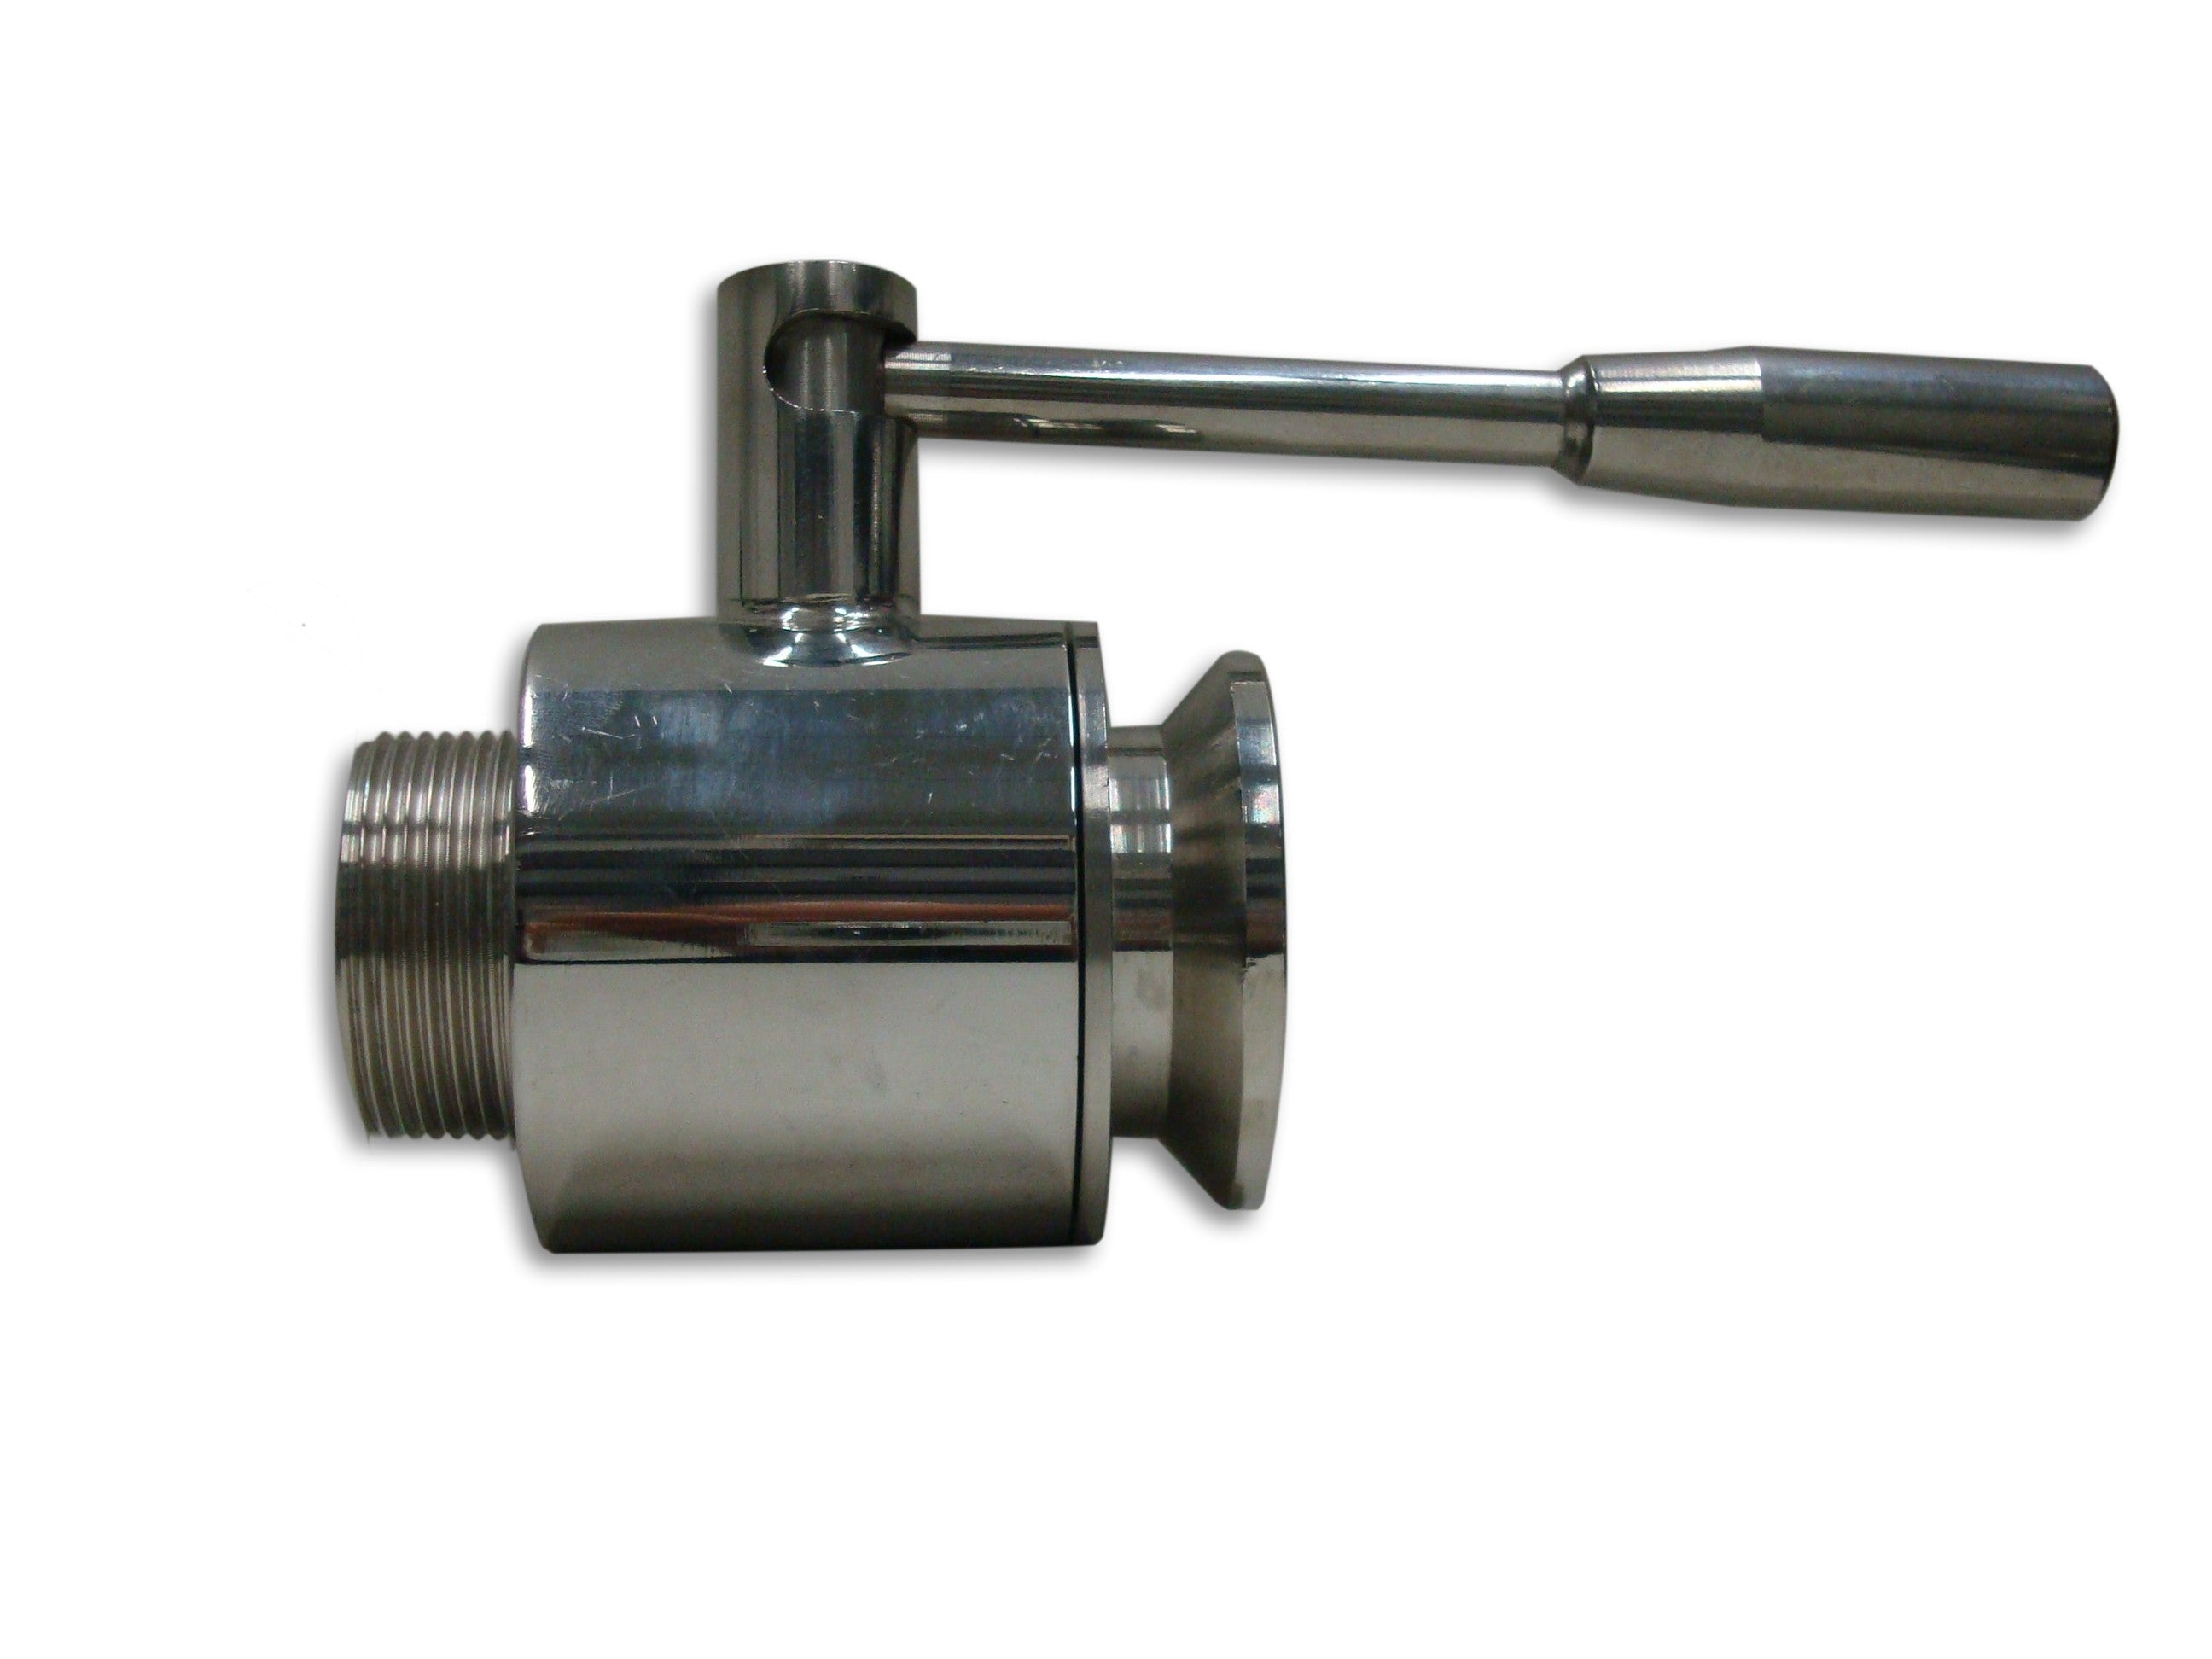 Stainless steel ball valve 1/2" with conection 40 garolla